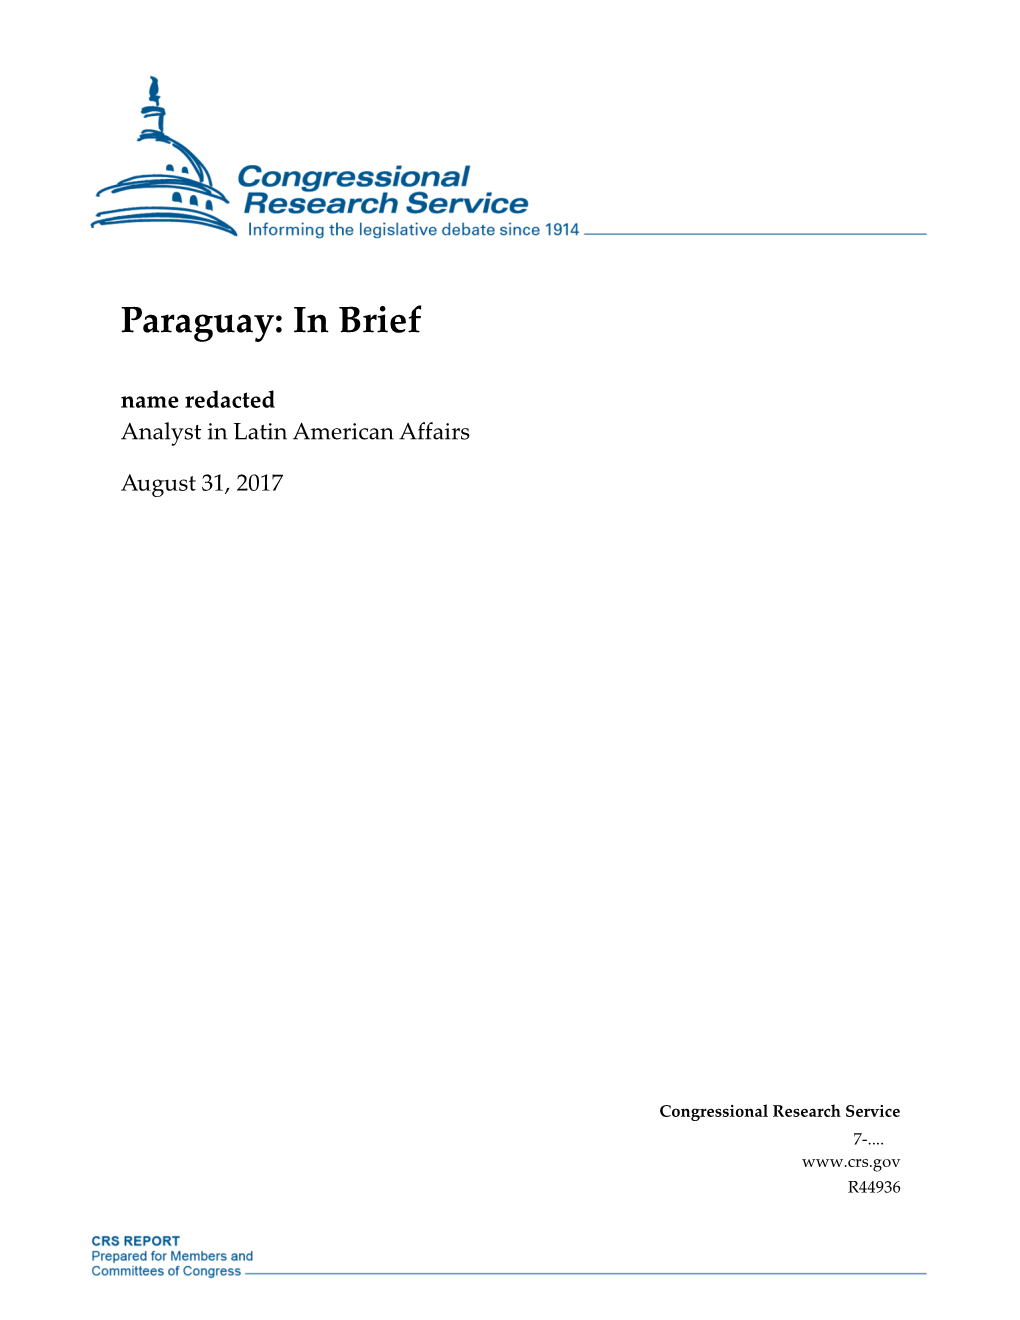 Paraguay: in Brief Name Redacted Analyst in Latin American Affairs